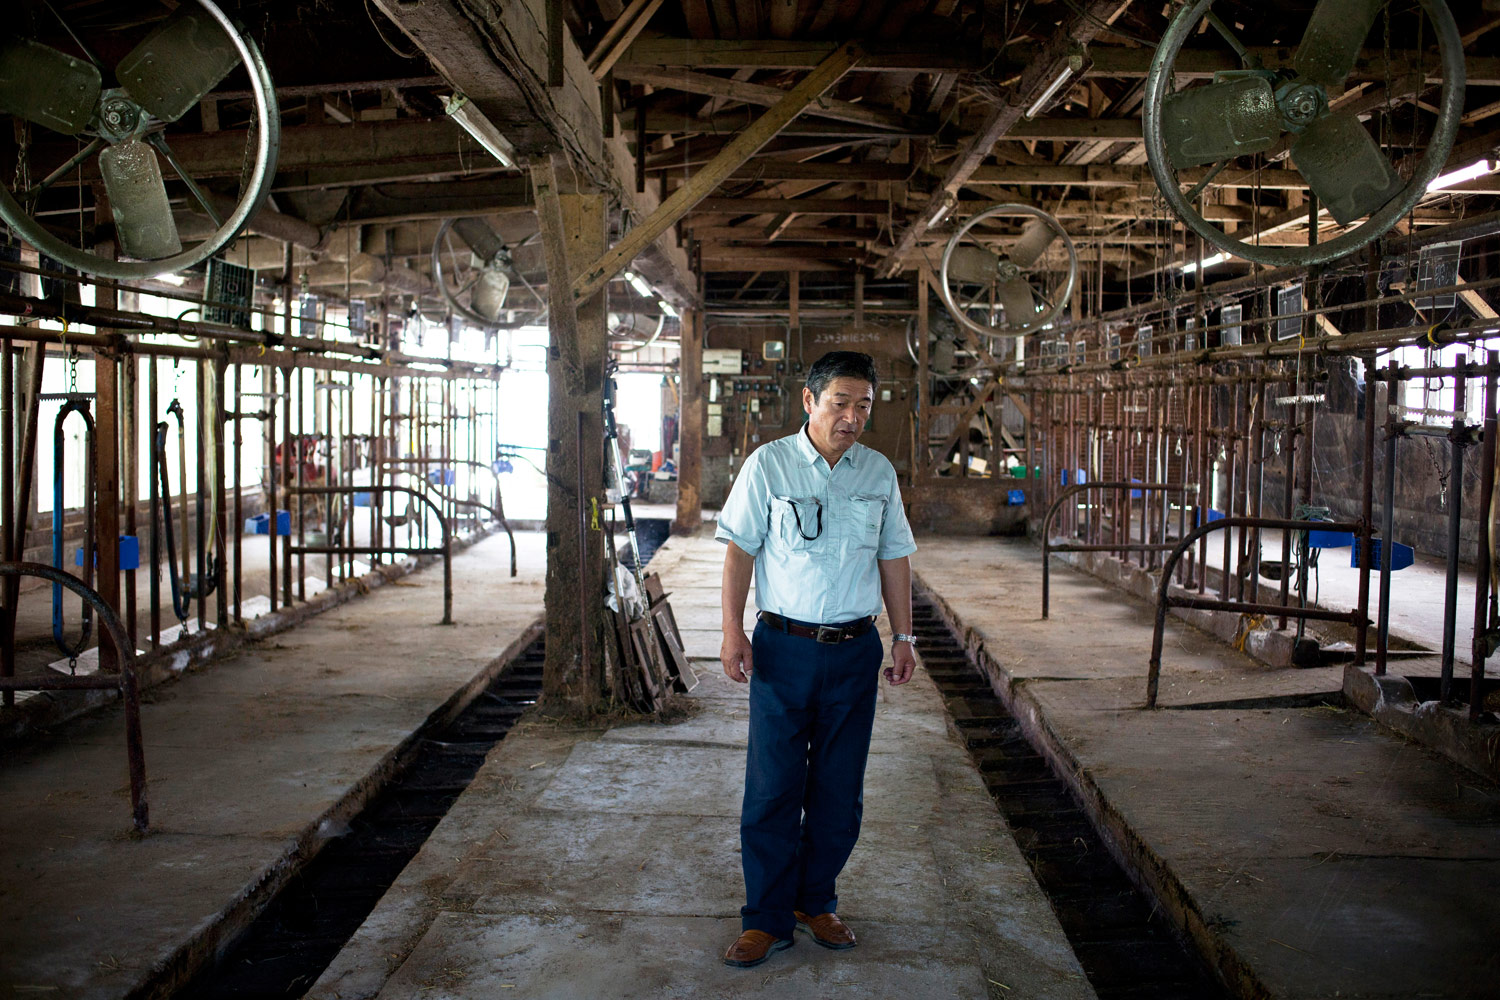 Kennichi Hasegawa, Director of Dairy Farmers’ Cooperative of Fukushima prefecture, visits his evacuated farm August 12, 2011. Hasegawa said he had to kill his livestock that was exposed to high levels of radiation. He now lives  in temporary housing in Date city.